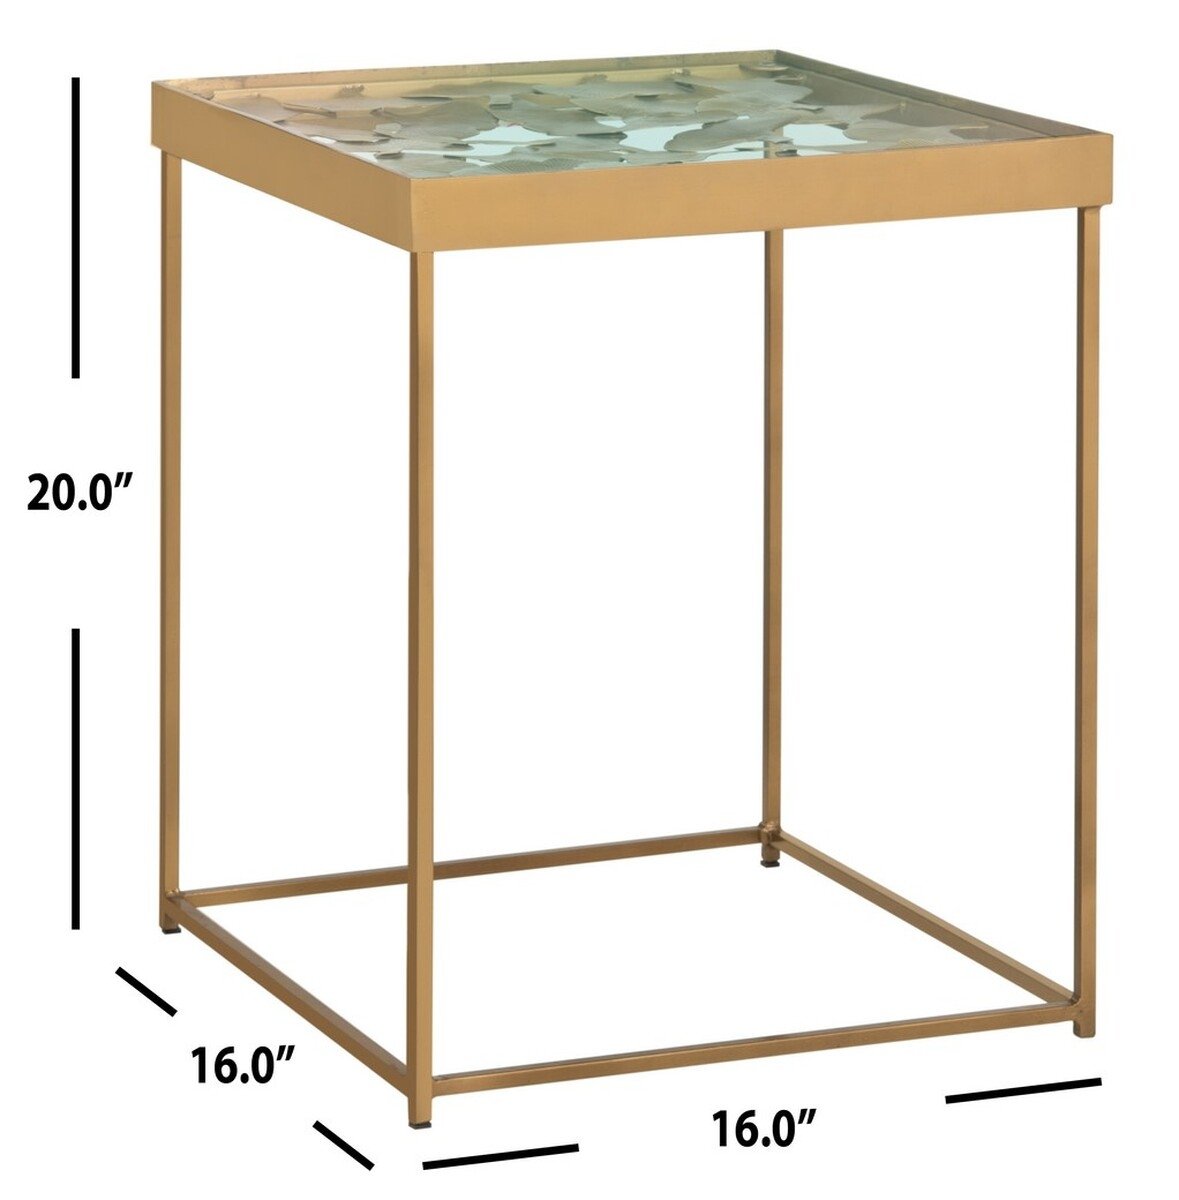 Lilian Leaf Side Table - Antique Brass - Arlo Home - Image 4